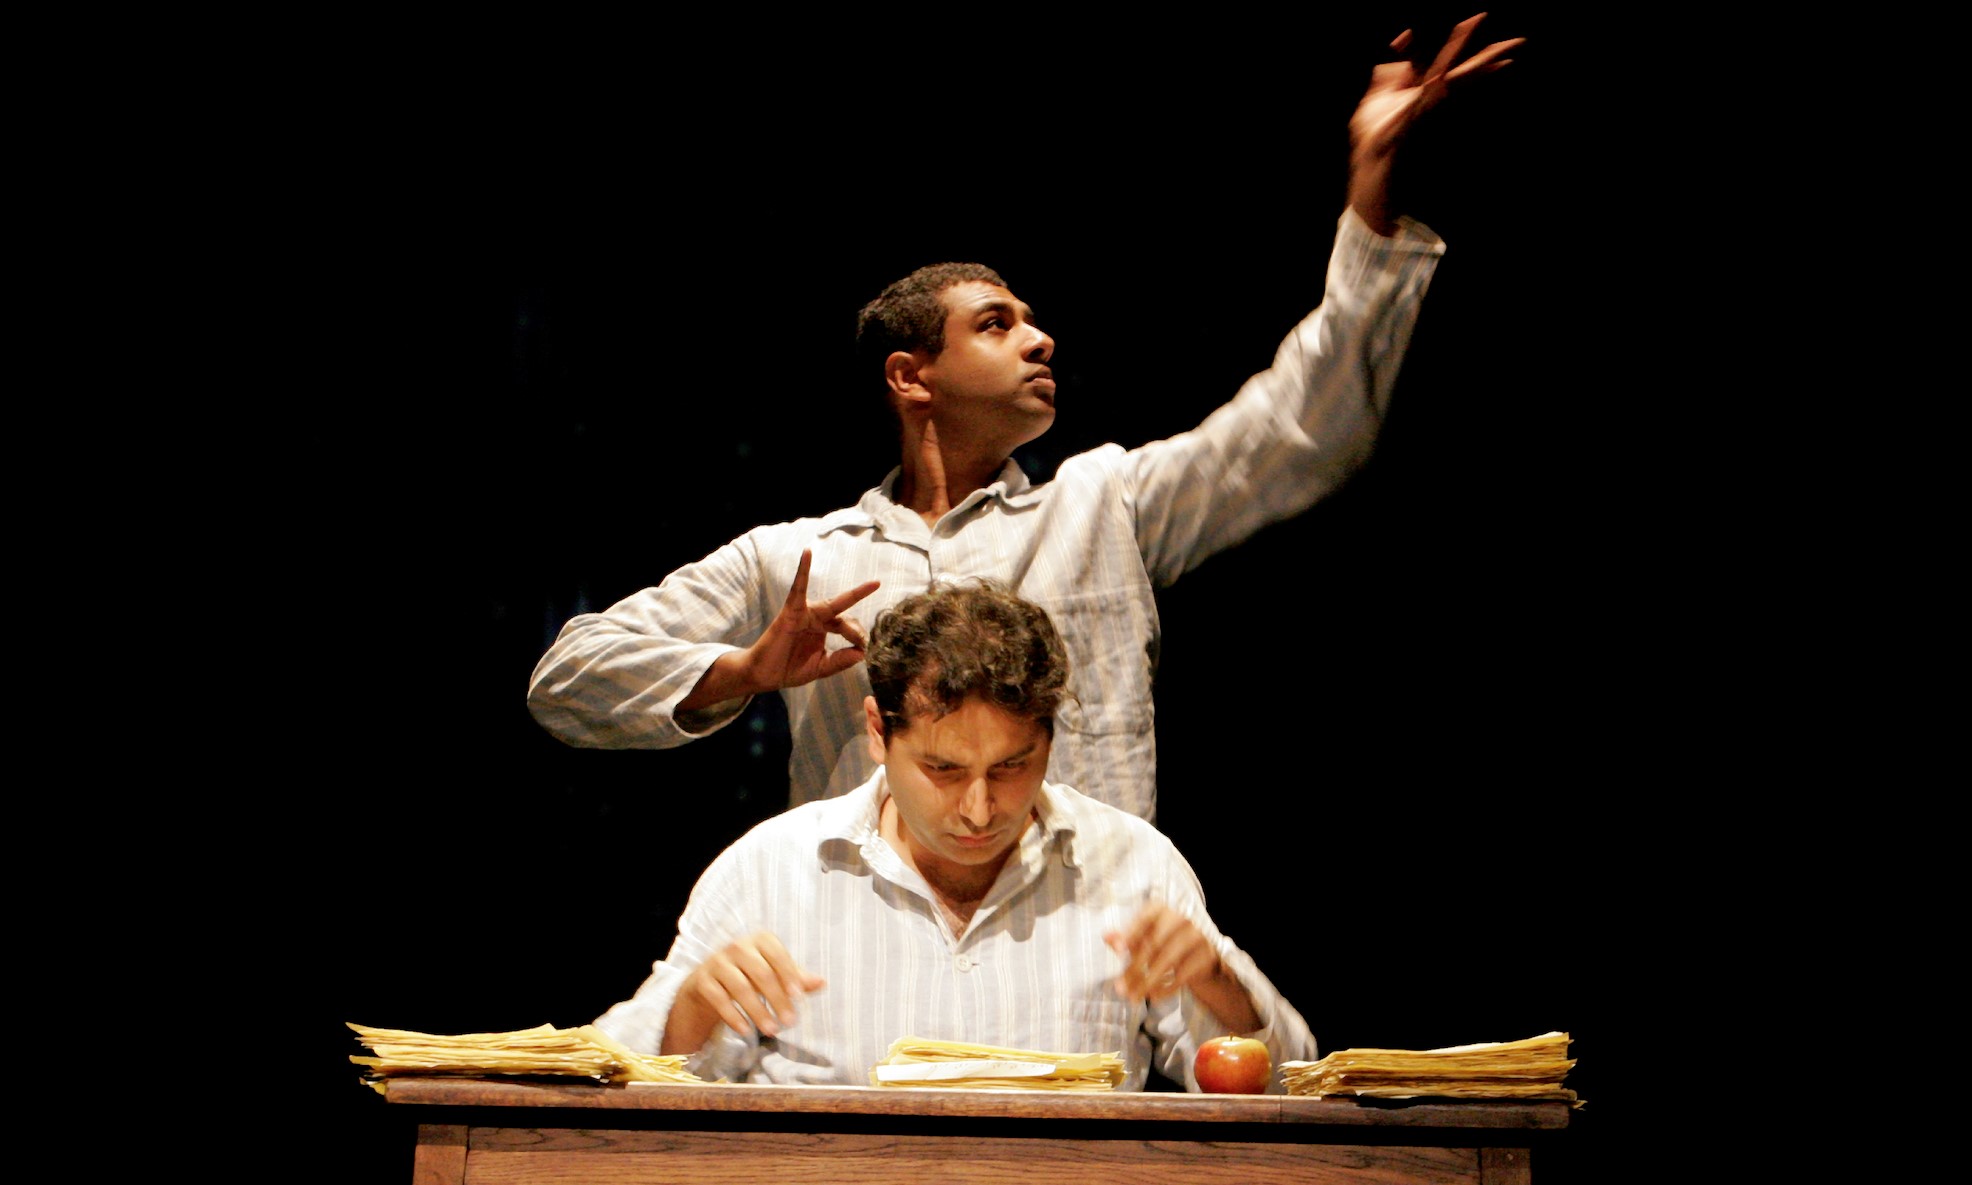 In A Disappearing Number, an actor stares seriously at the pile of papers on the desk, while another actor behind reaches a hand ponderously upwards.